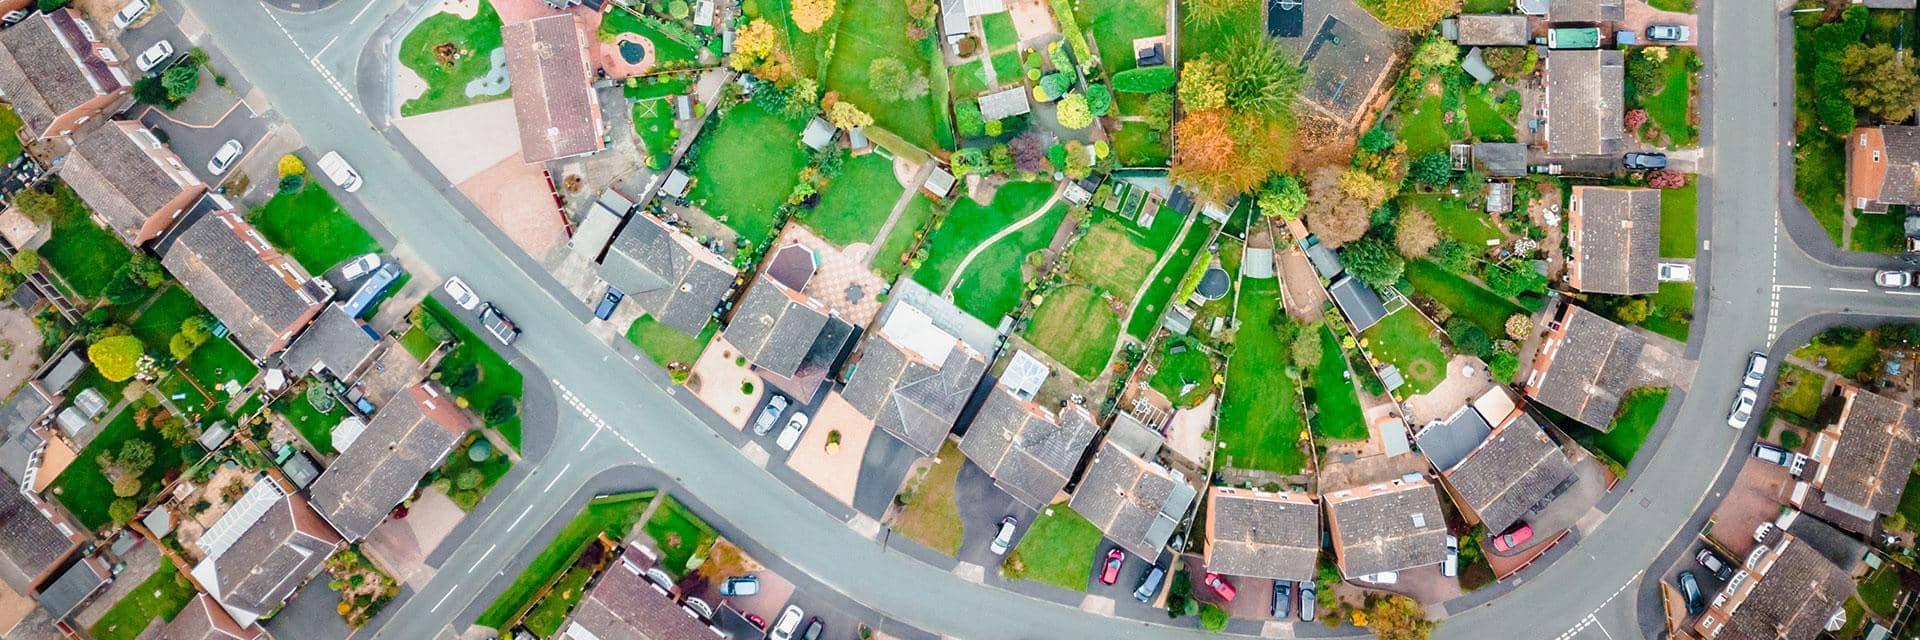 An ariel view of a neighbourhood. We offer support to local governments as they analyse challenges.
